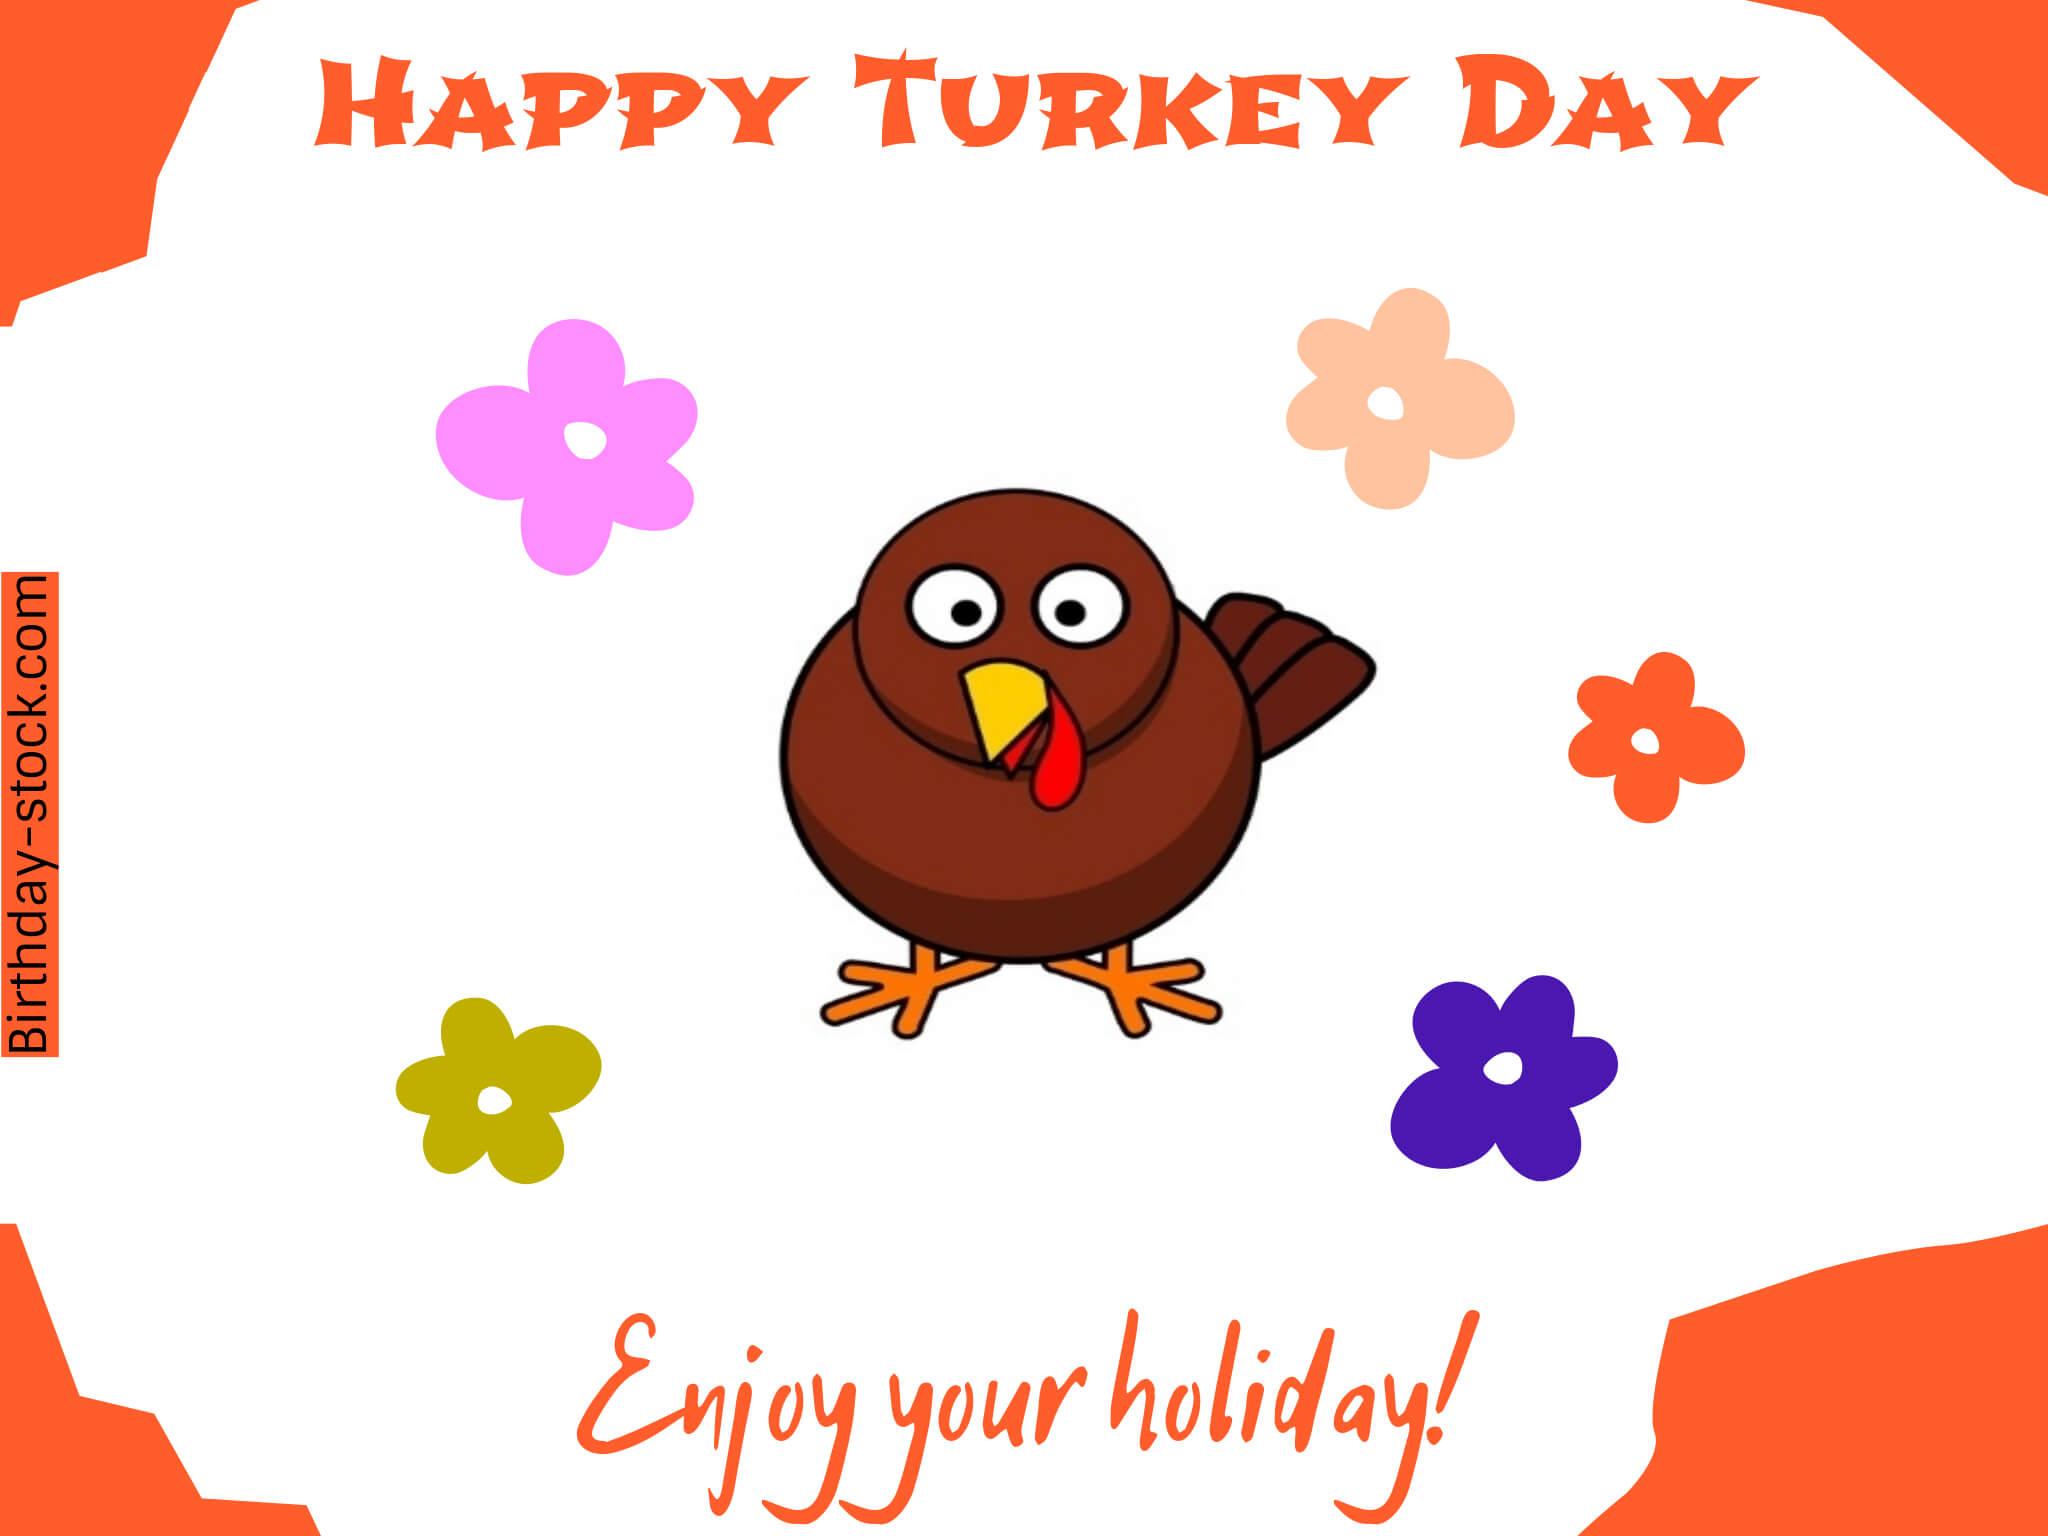 Happy Turkey Day Image, Picture, Photo, Wishes, Messages